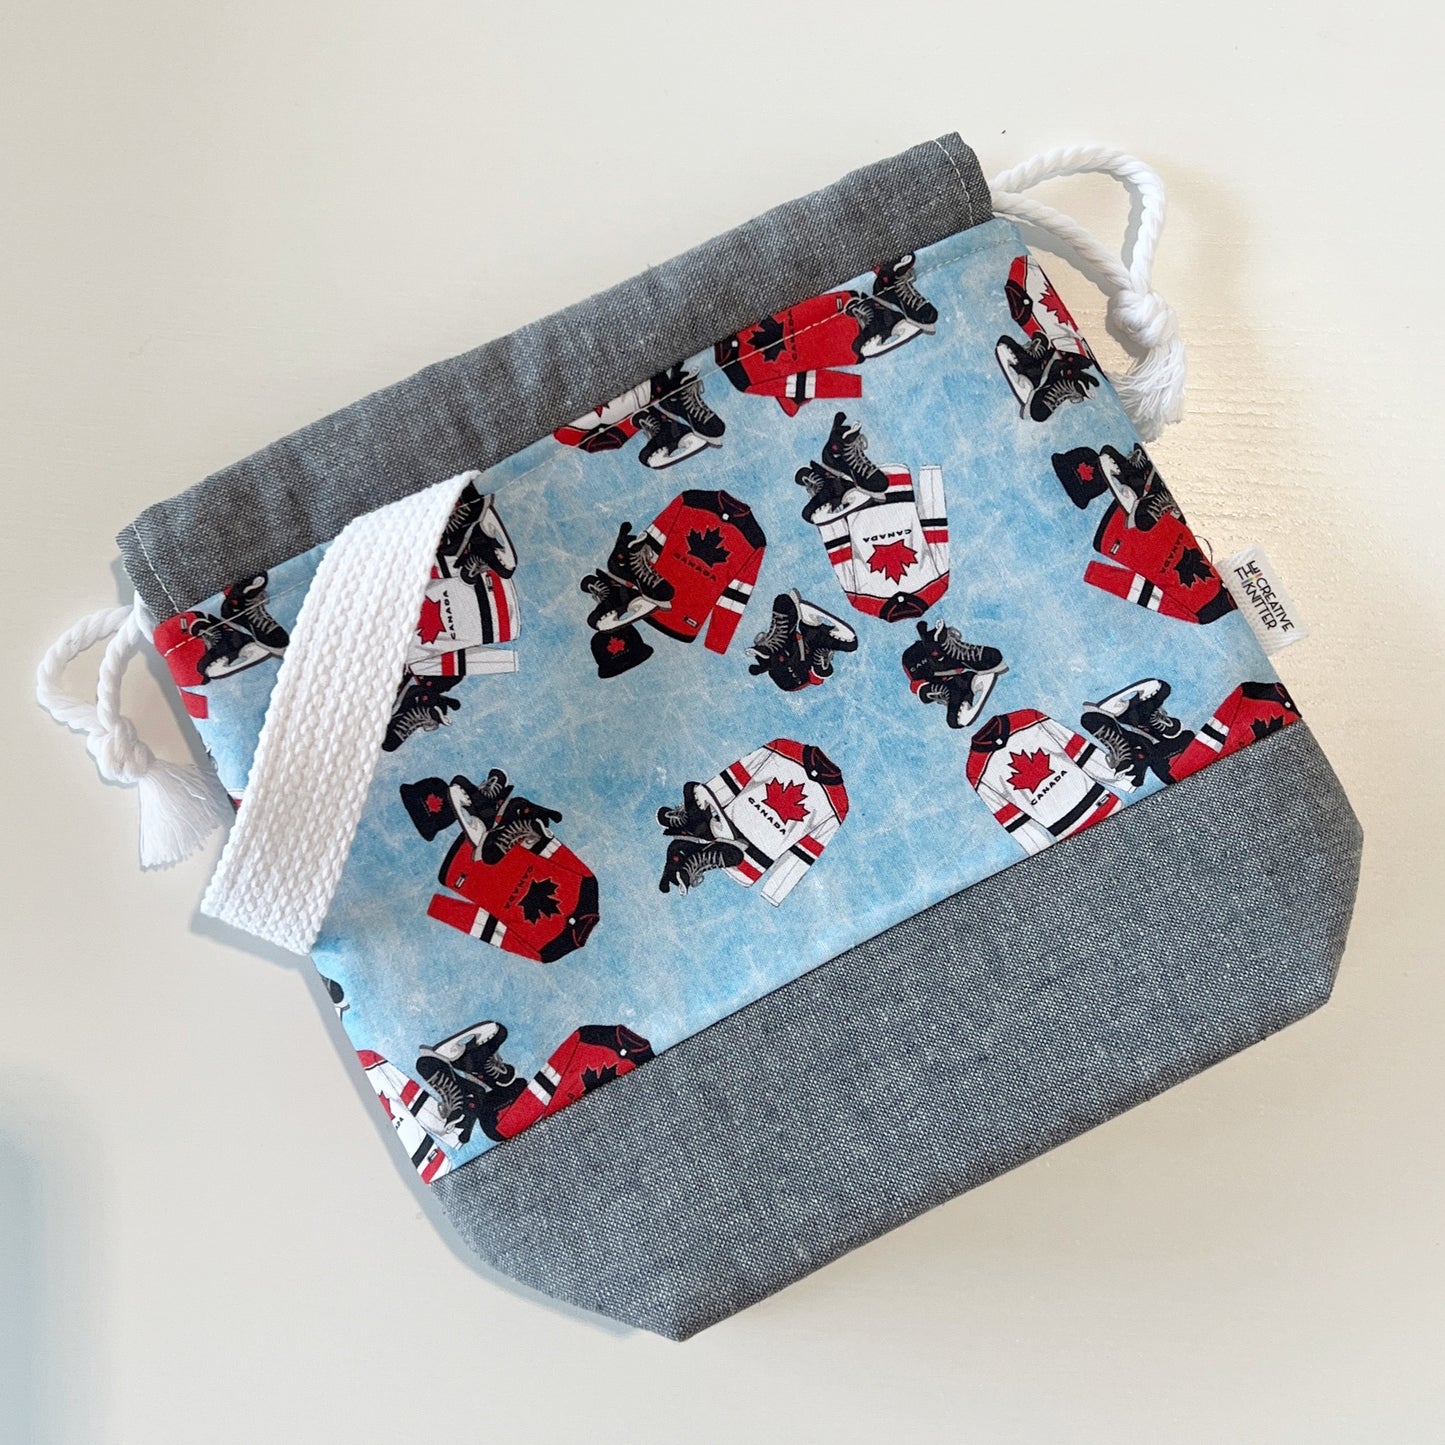 The Creative Knitter | Small Project Bags